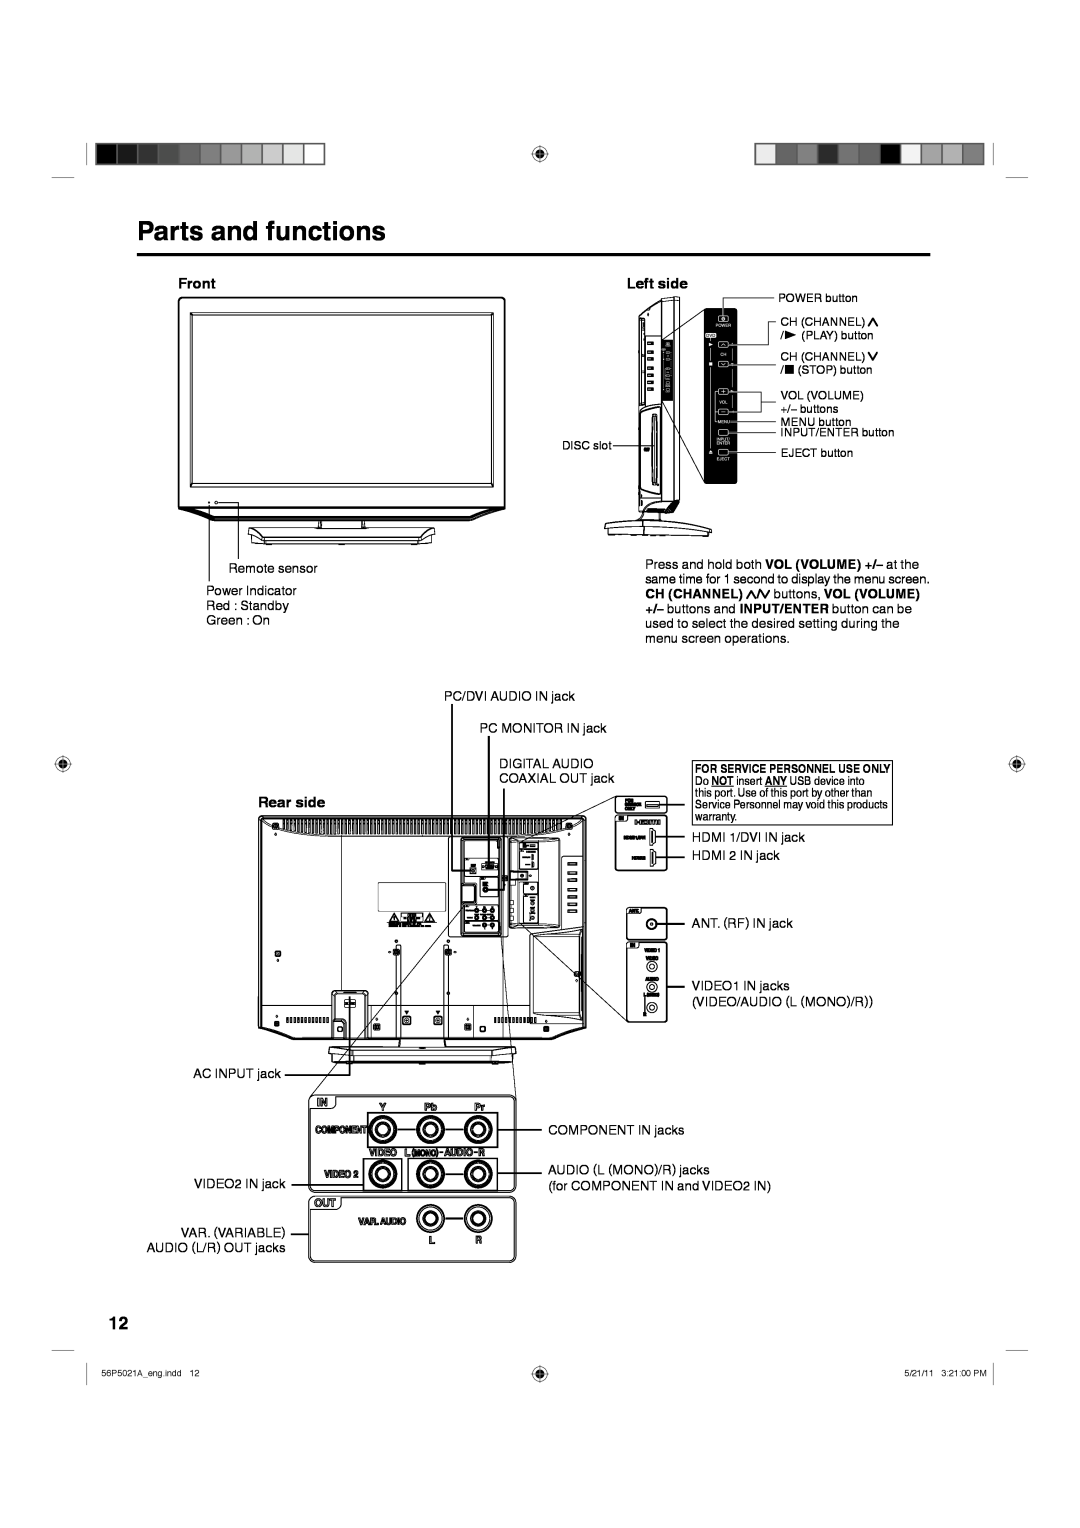 Hitachi L26D205 important safety instructions Parts and functions, Front, Left side, Rear side 